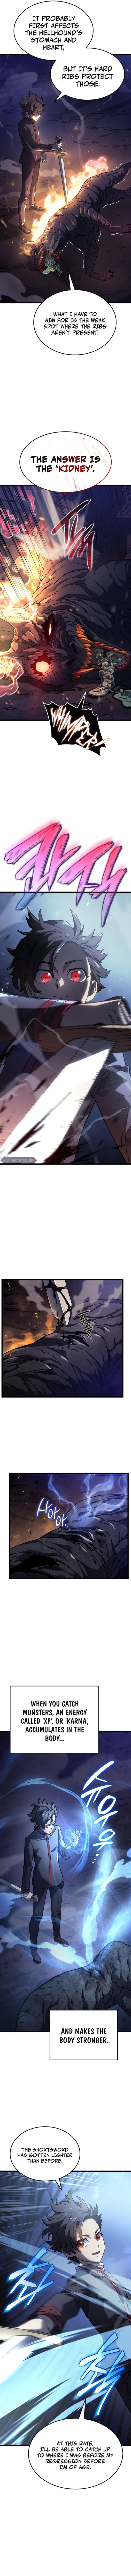 Revenge Of The Iron Blooded Sword Hound Chapter 5 Page 4